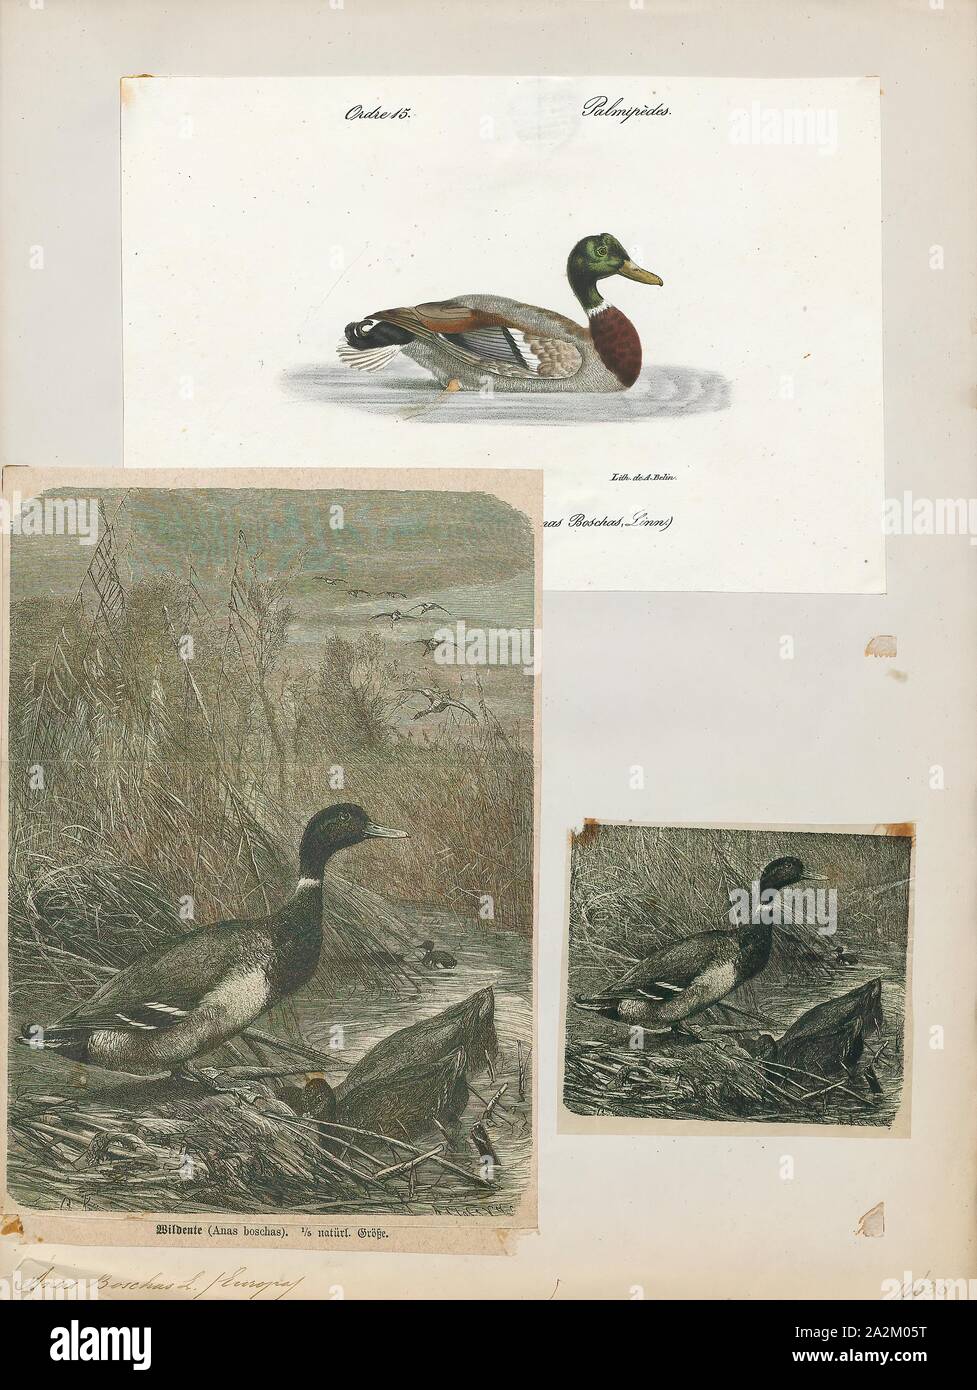 Anas boschas, Print, The mallard (Anas platyrhynchos) is a dabbling duck that breeds throughout the temperate and subtropical Americas, Eurasia, and North Africa and has been introduced to New Zealand, Australia, Peru, Brazil, Uruguay, Argentina, Chile, Colombia, the Falkland Islands, and South Africa. This duck belongs to the subfamily Anatinae of the waterfowl family Anatidae. The male birds (drakes) have a glossy green head and are grey on their wings and belly, while the females (hens or ducks) have mainly brown-speckled plumage. Both sexes have an area of white-bordered black or Stock Photo